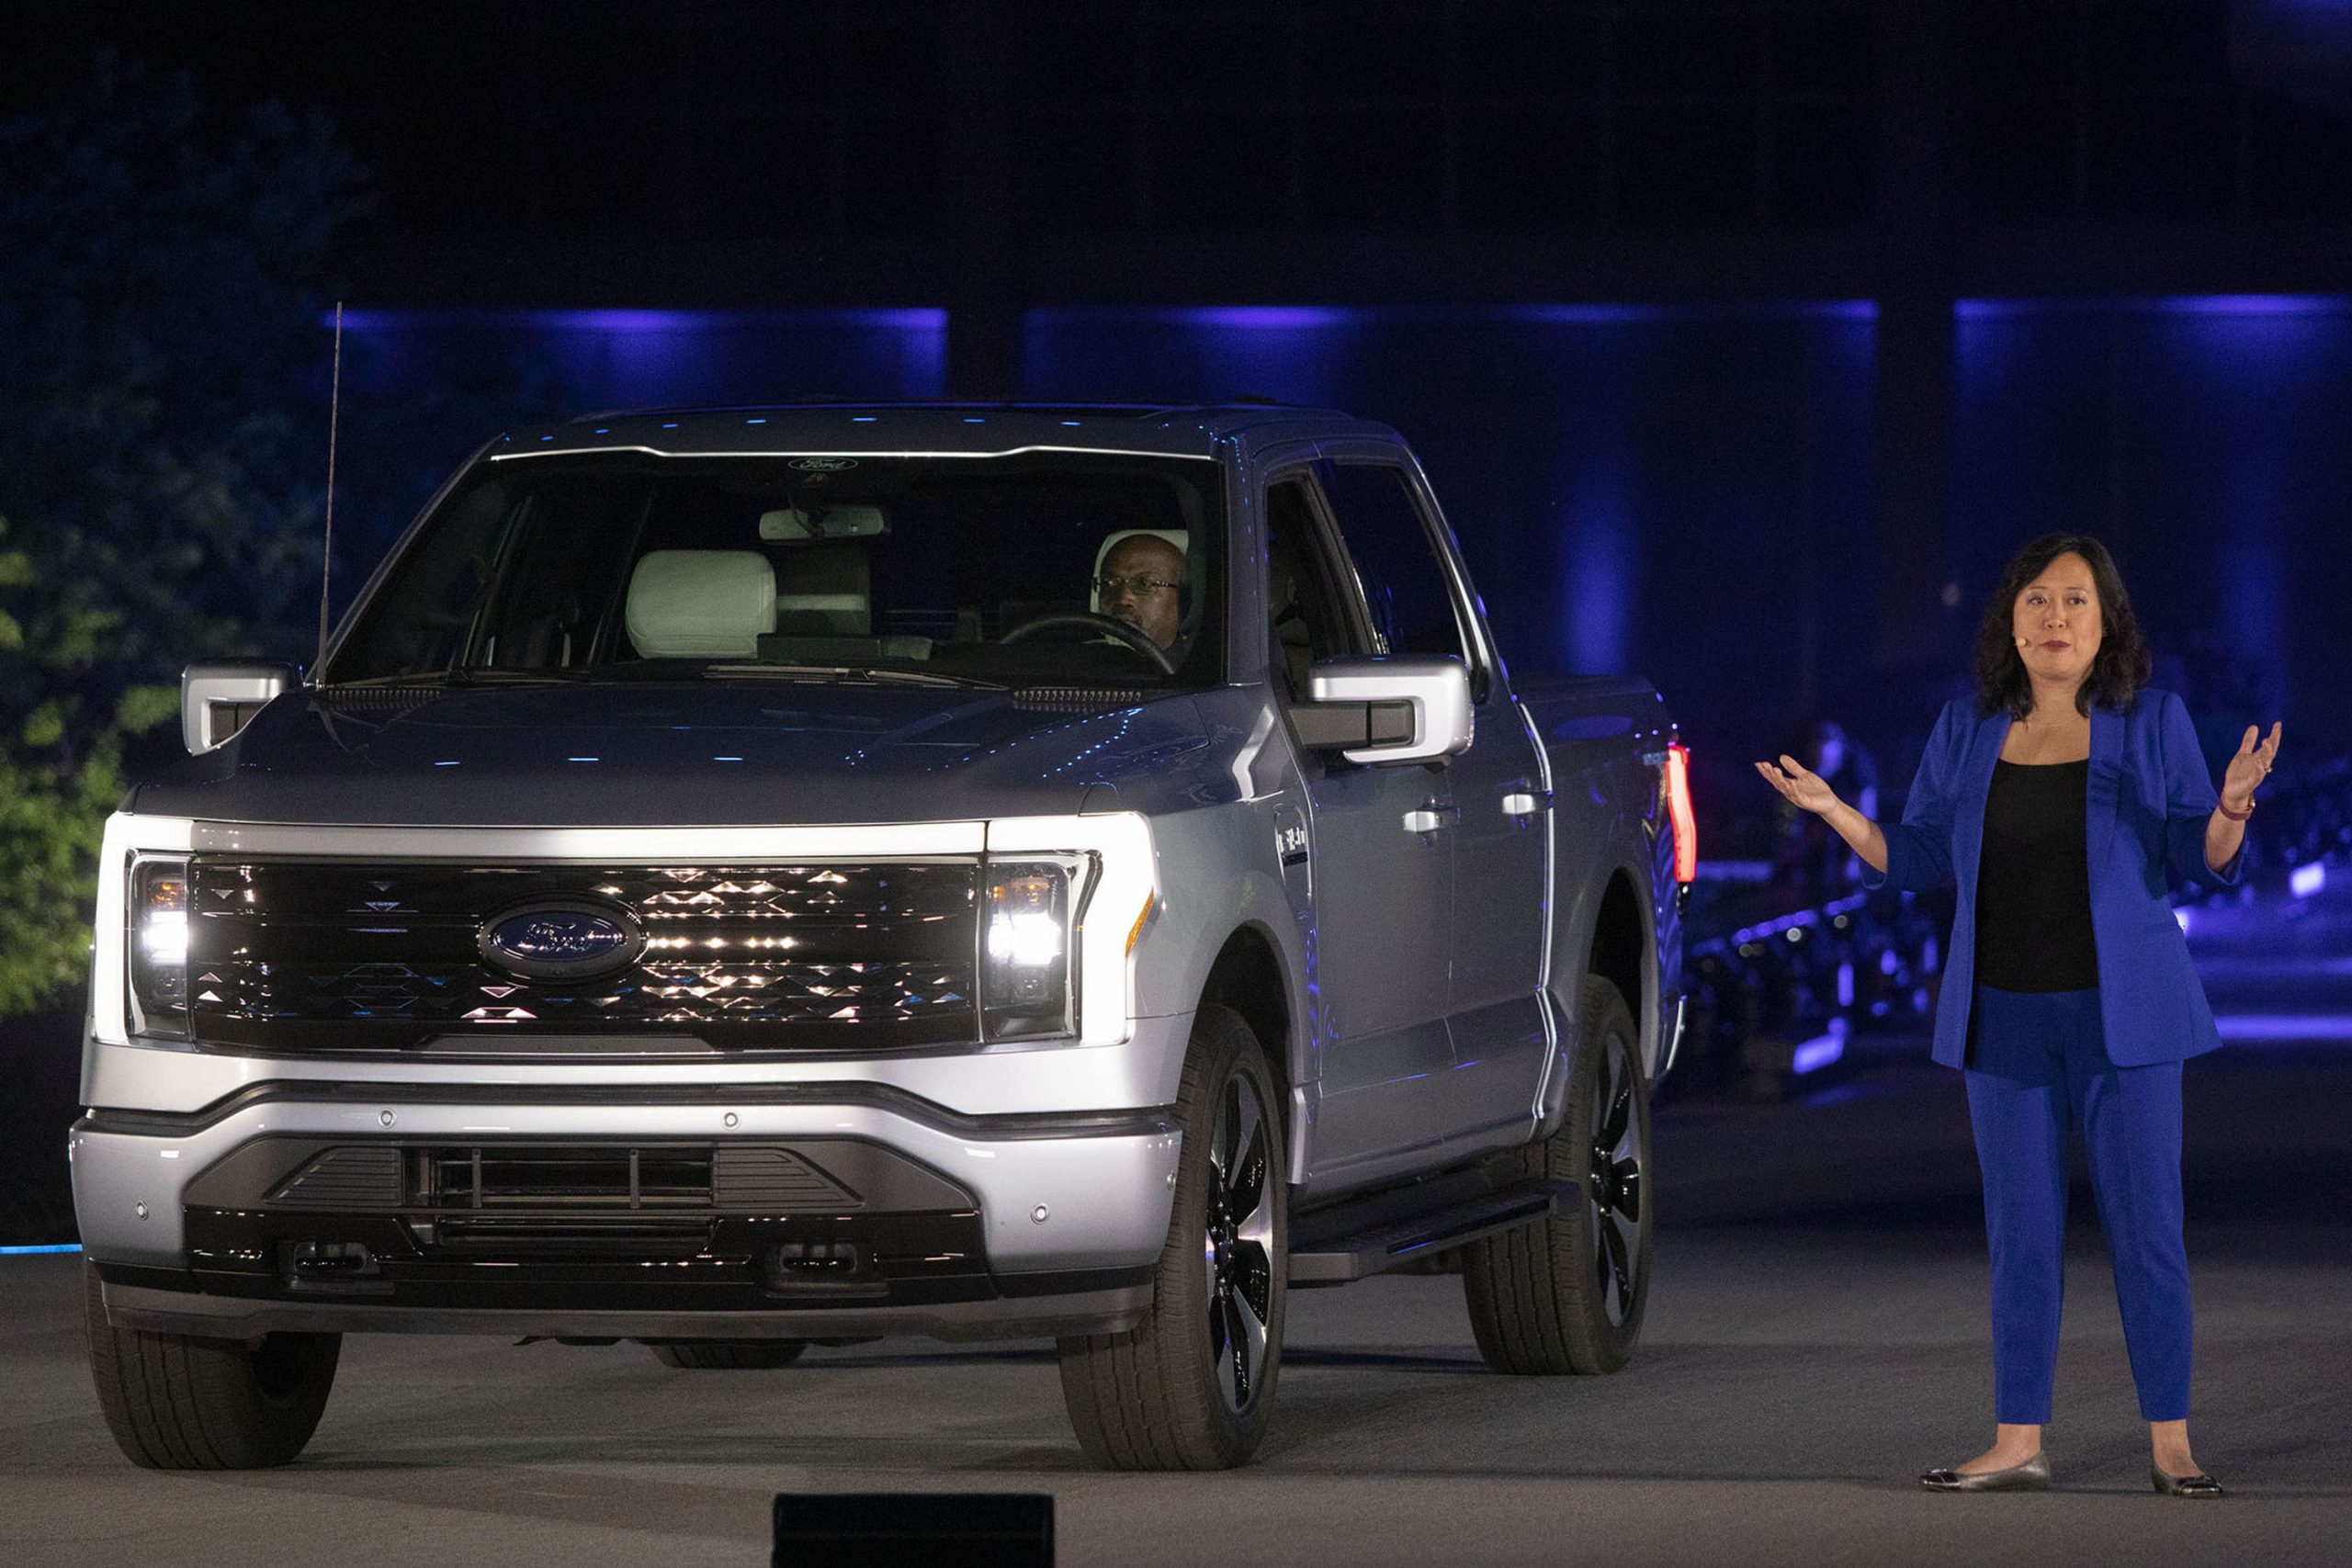 Linda Zhang, Chief Engineer, speaks at the reveal of the new all-electric Ford F-150 Lightning pickup truck in silver at Ford World Headquarters